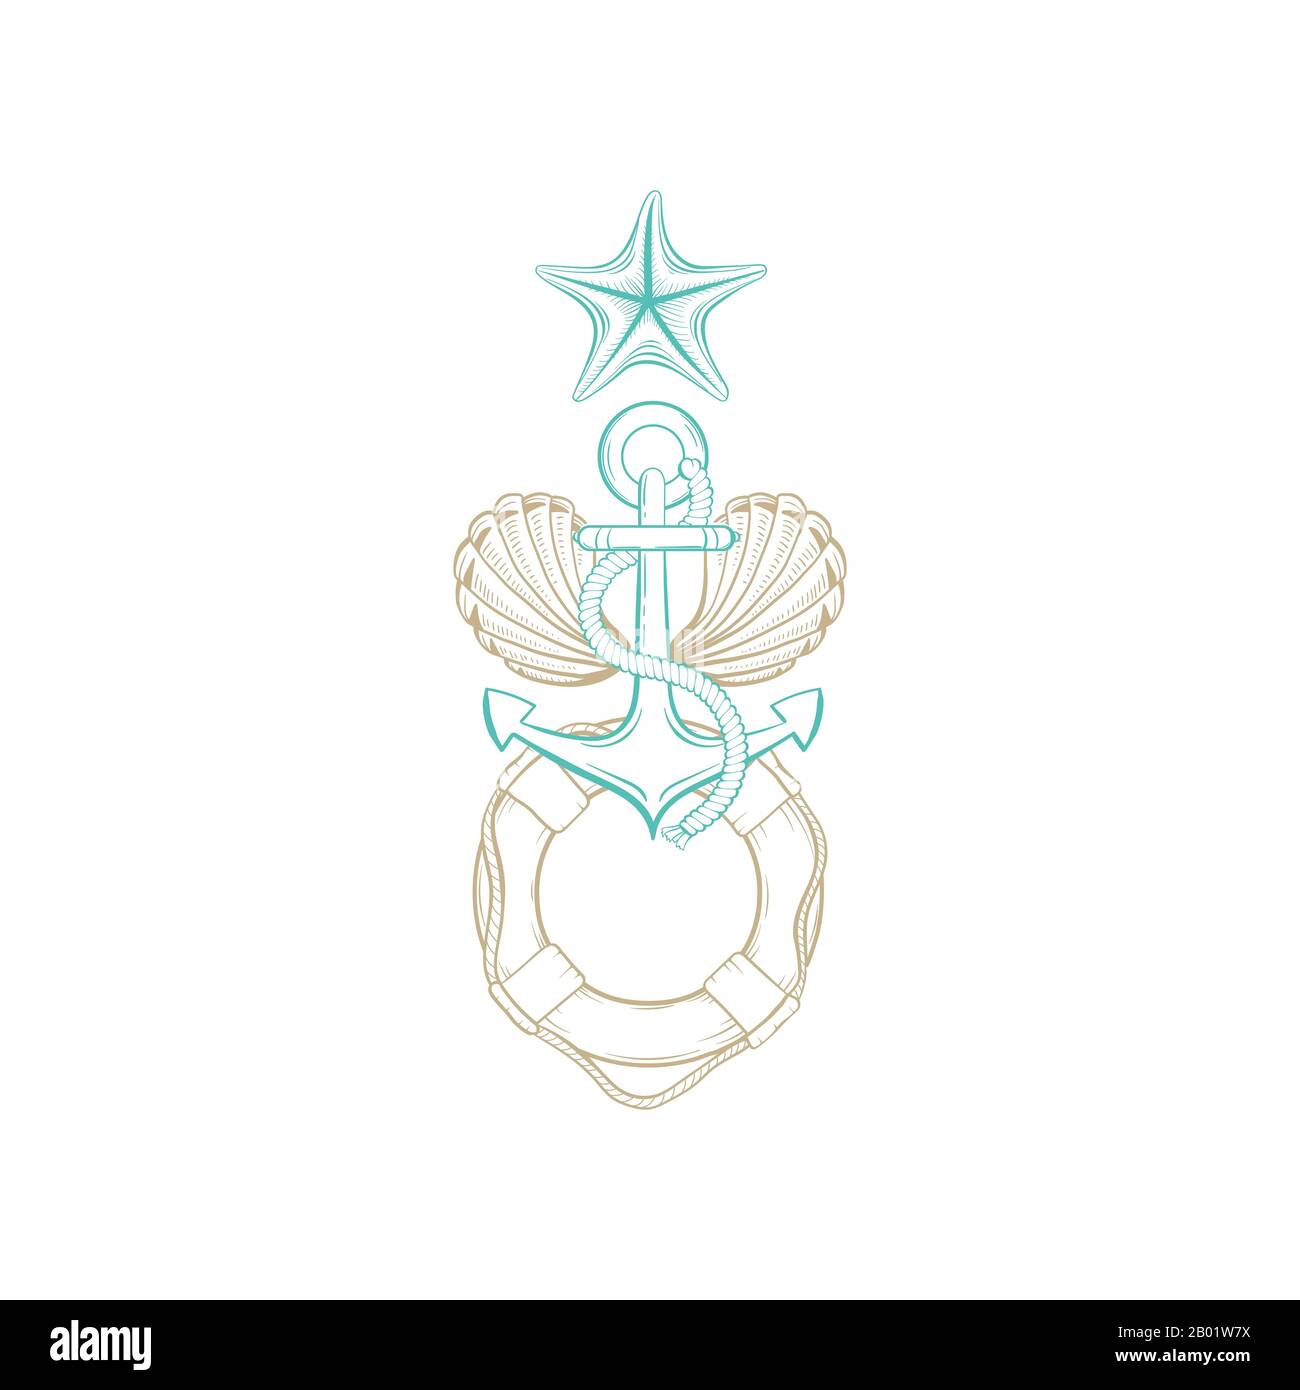 Marine art design, vector gold line seashell, ship anchor with rope, starfish and buoy abstract symbol. Nautical line art style sketch drawing in turquoise and gold etching for t-shirt print Stock Vector